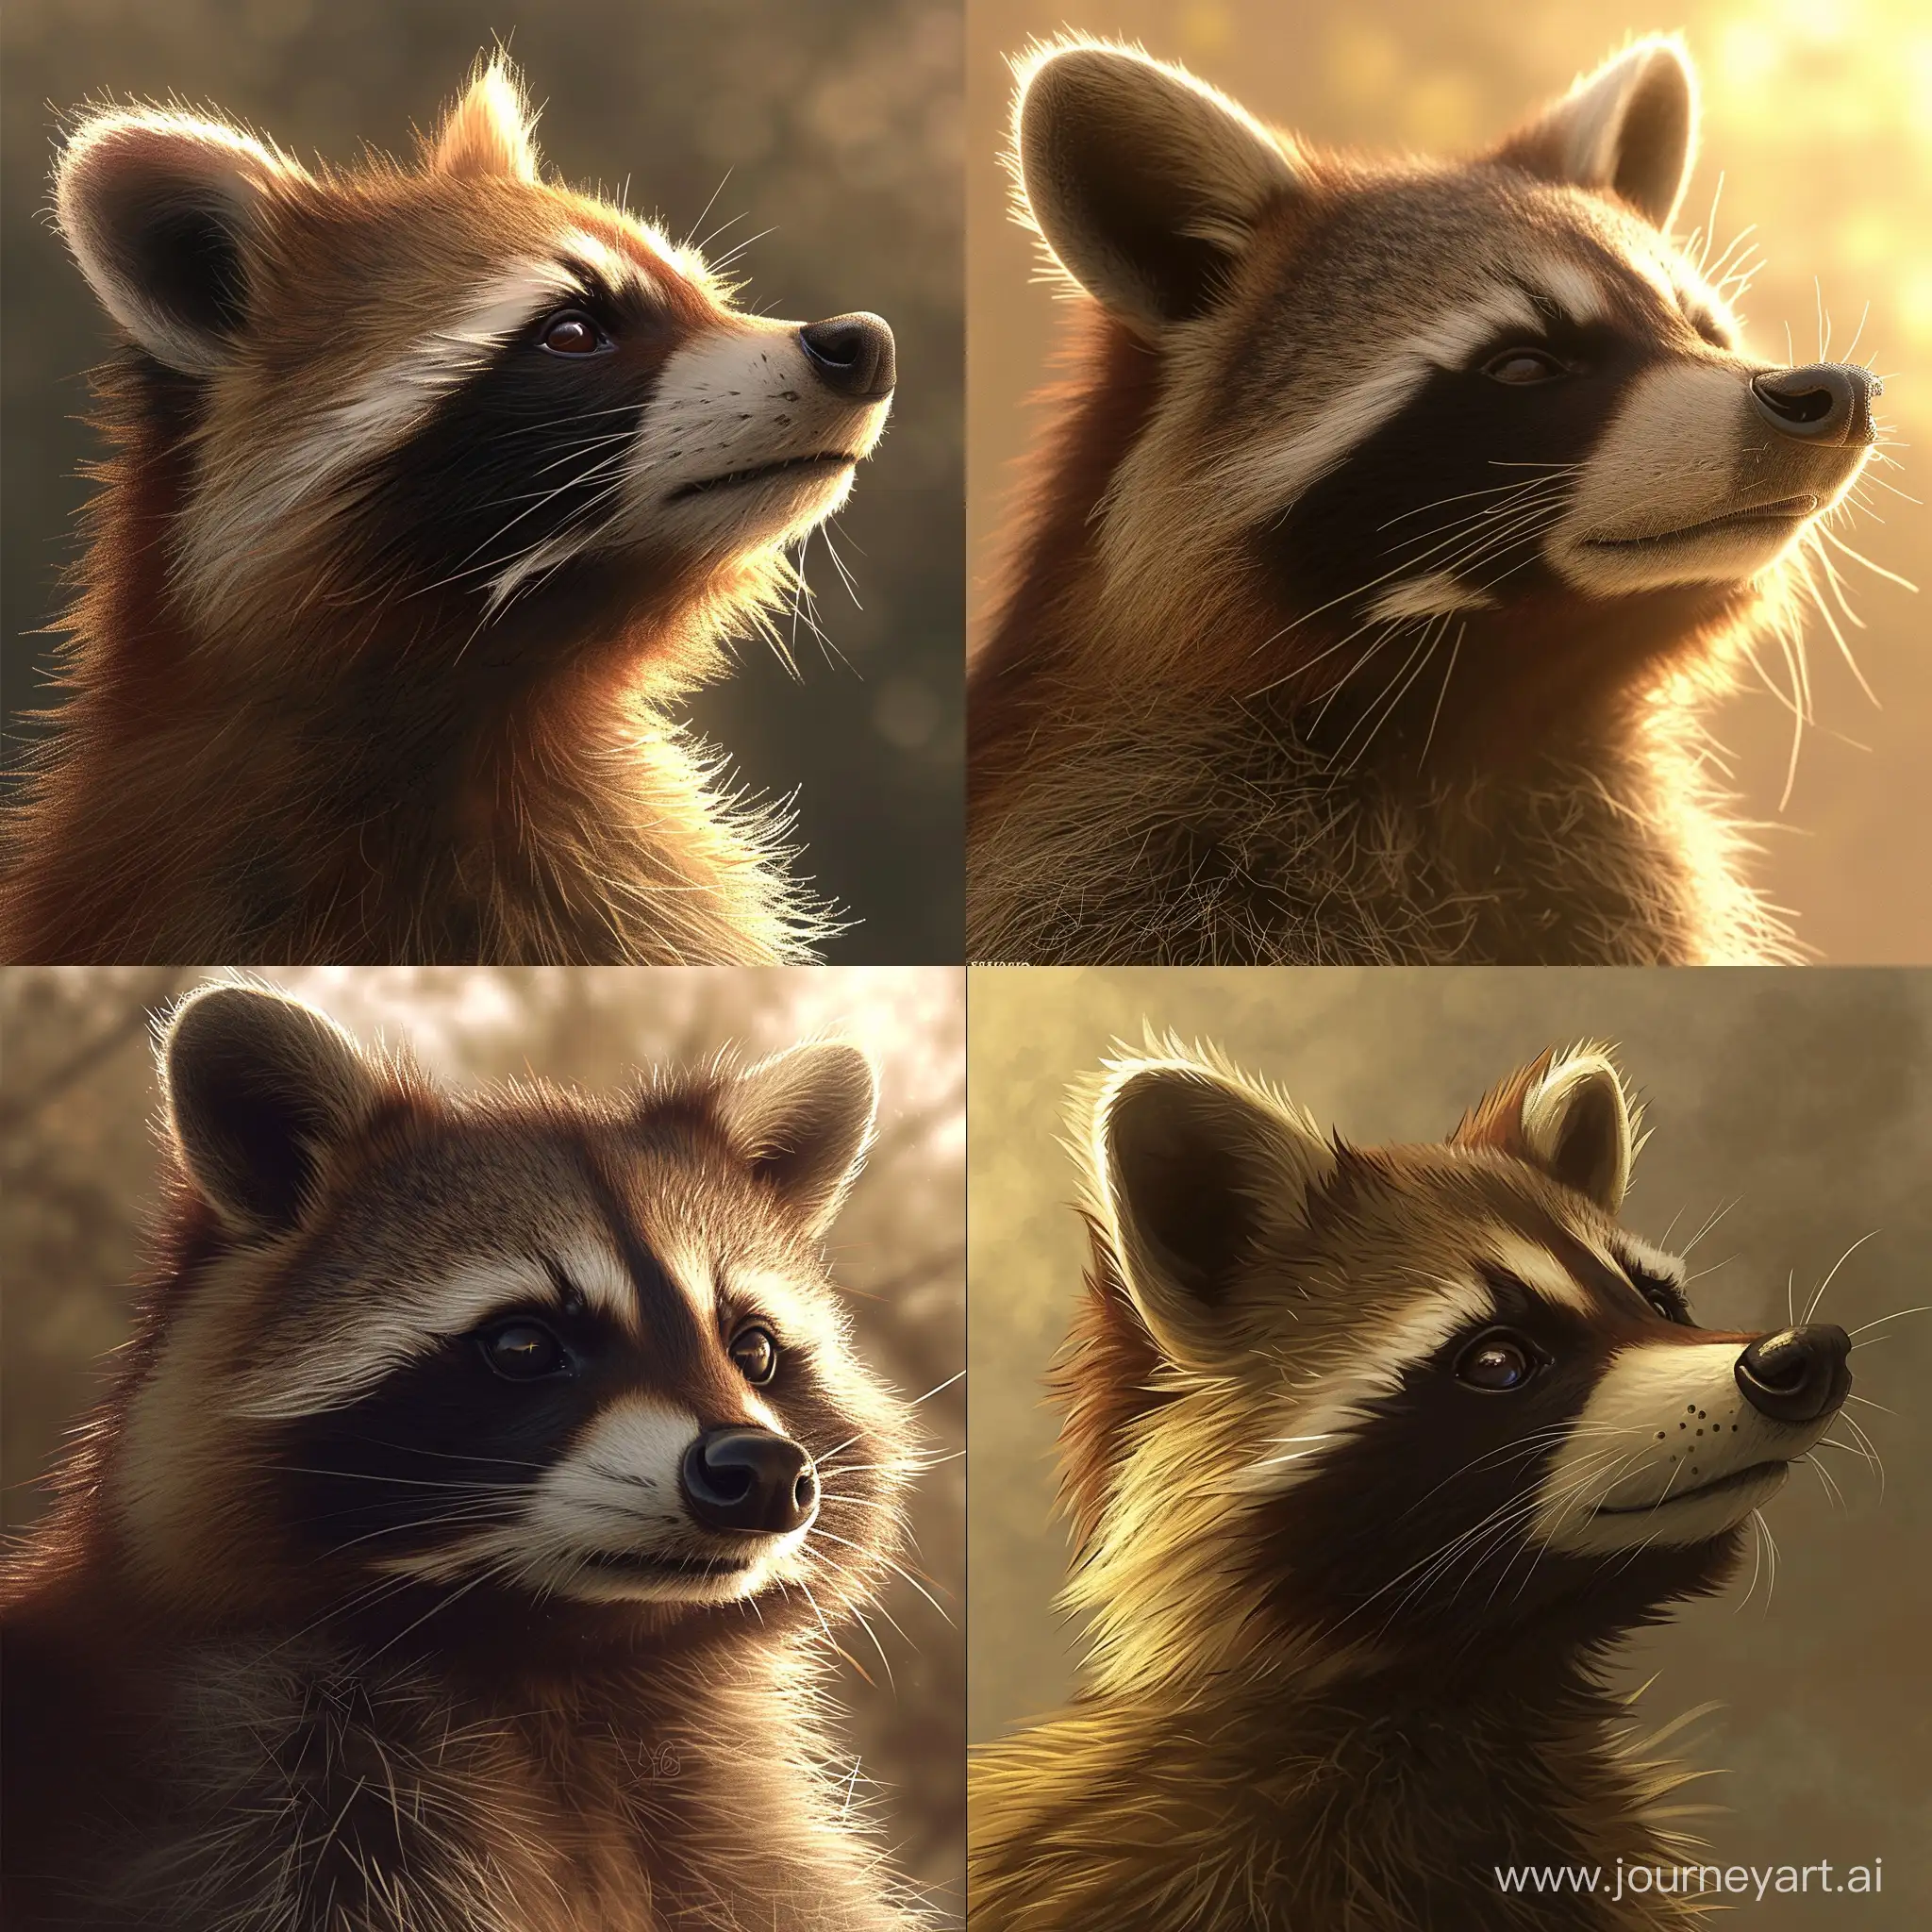 /imagine prompt:A close-up of a raccoon head, styled like Reddit Collectible Avatars, turned approximately 45 degrees to the right, face slightly tilted downwards, creating an impression of contemplation or rest. Cartoon, art cute cartoon, digital rendering, capturing the unique texture and colors of raccoon cartoon, with attention to the facial expression that conveys a thoughtful or relaxed mood. Created Using:  styled like Reddit Collectible Avatars, digital art tools, avatar-inspired style, soft shading, subtle lighting, focus on facial details, slightly cartoonish,, --ar 1:1 --v 6.0